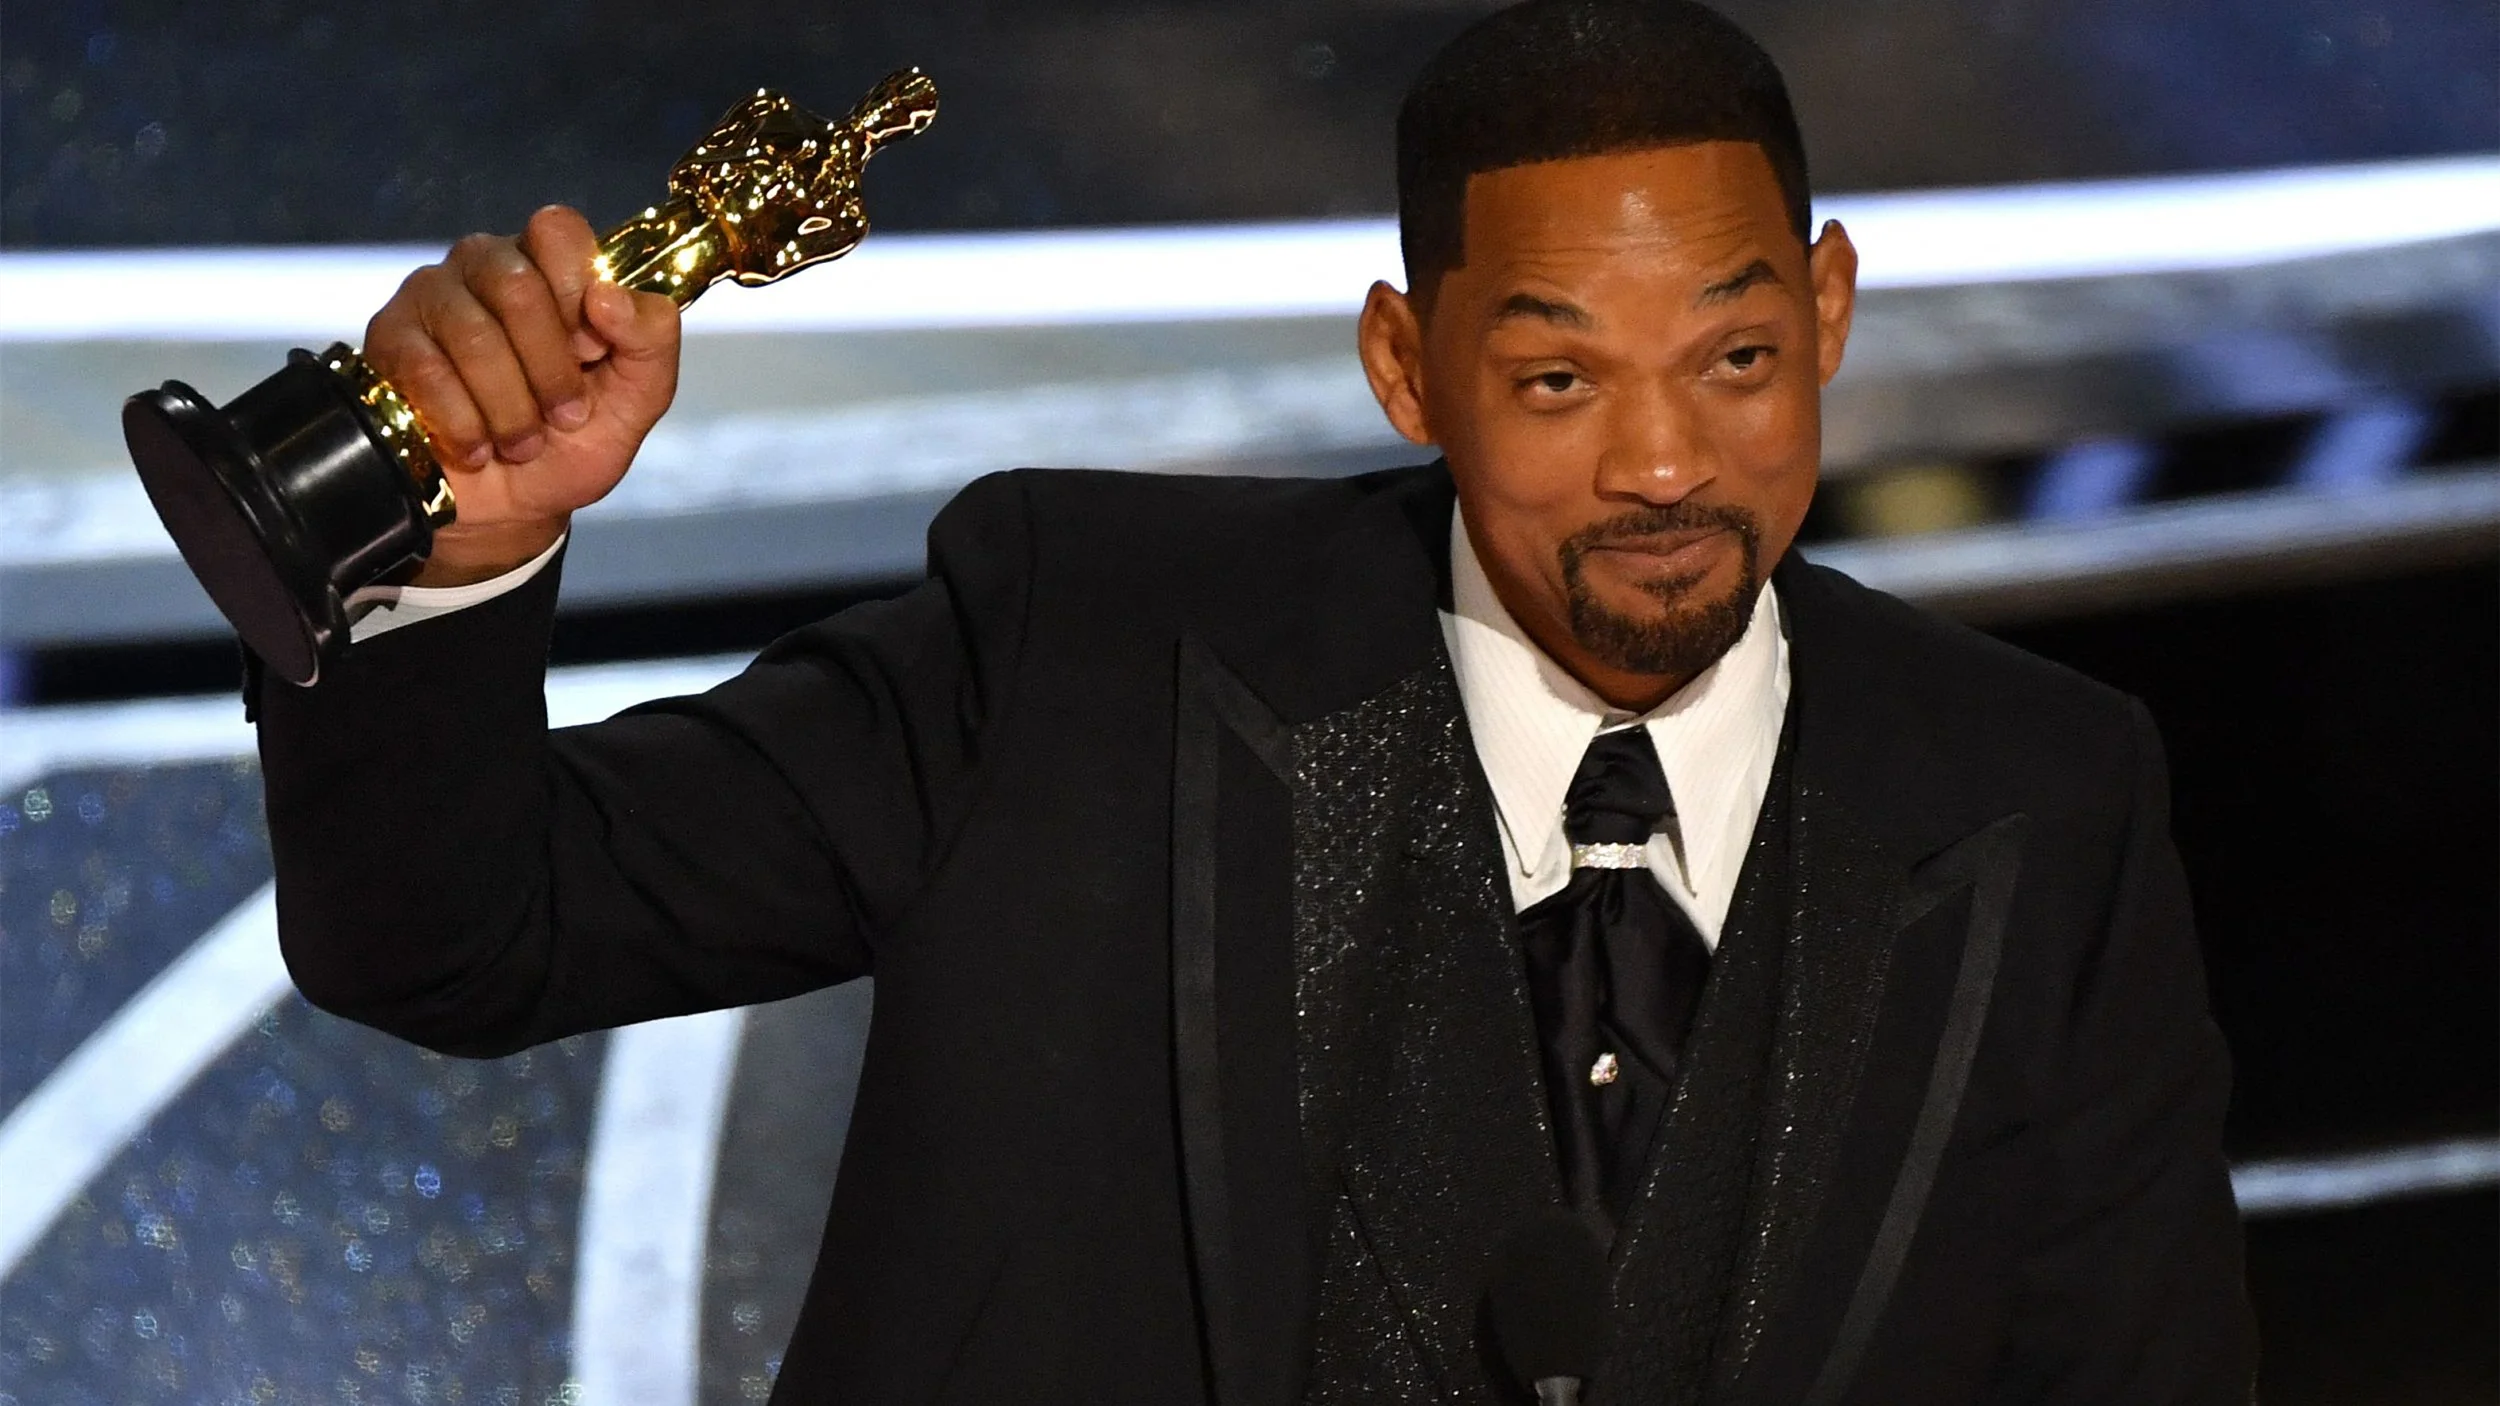 Oscar organizer's statement is fake? Will Smith was never asked to leave the awards ceremony